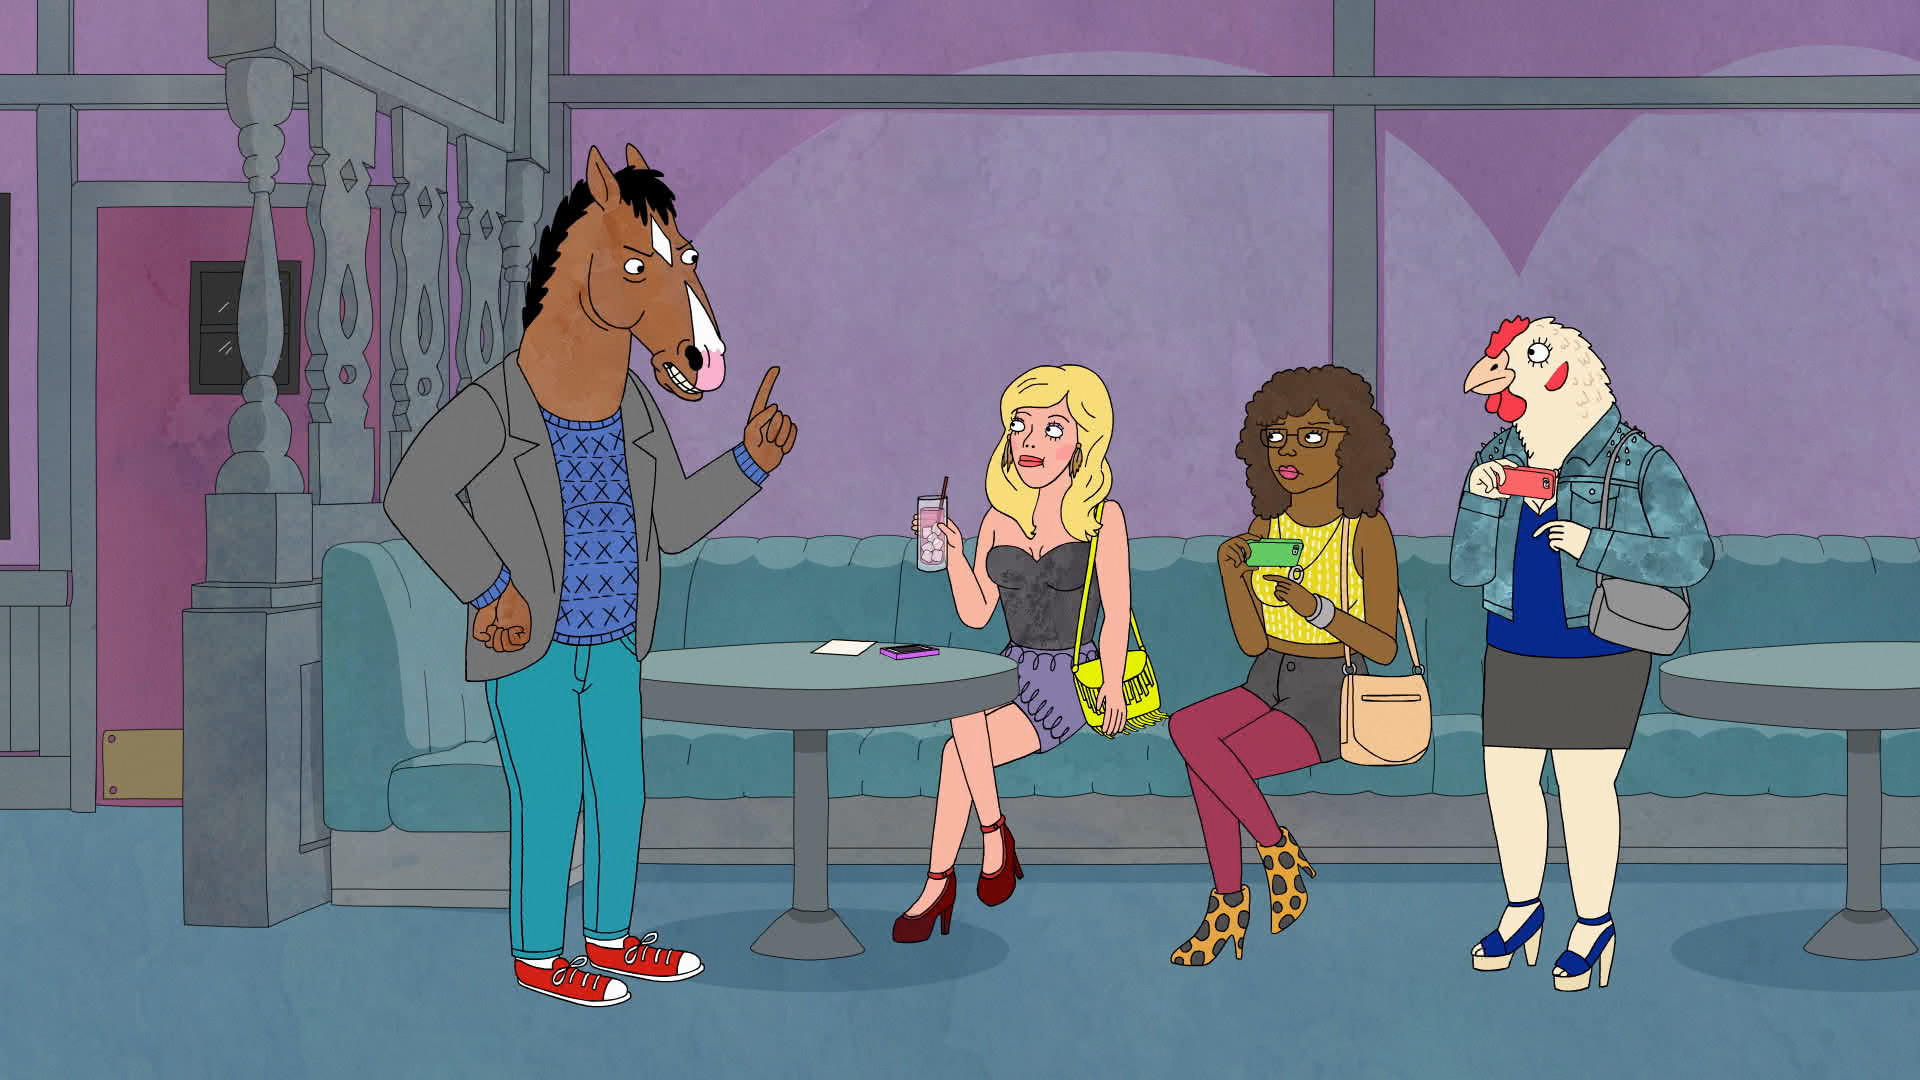 1920x1080 BoJack Horseman is a Strange and Hilarious Tale of Attempted Redemption